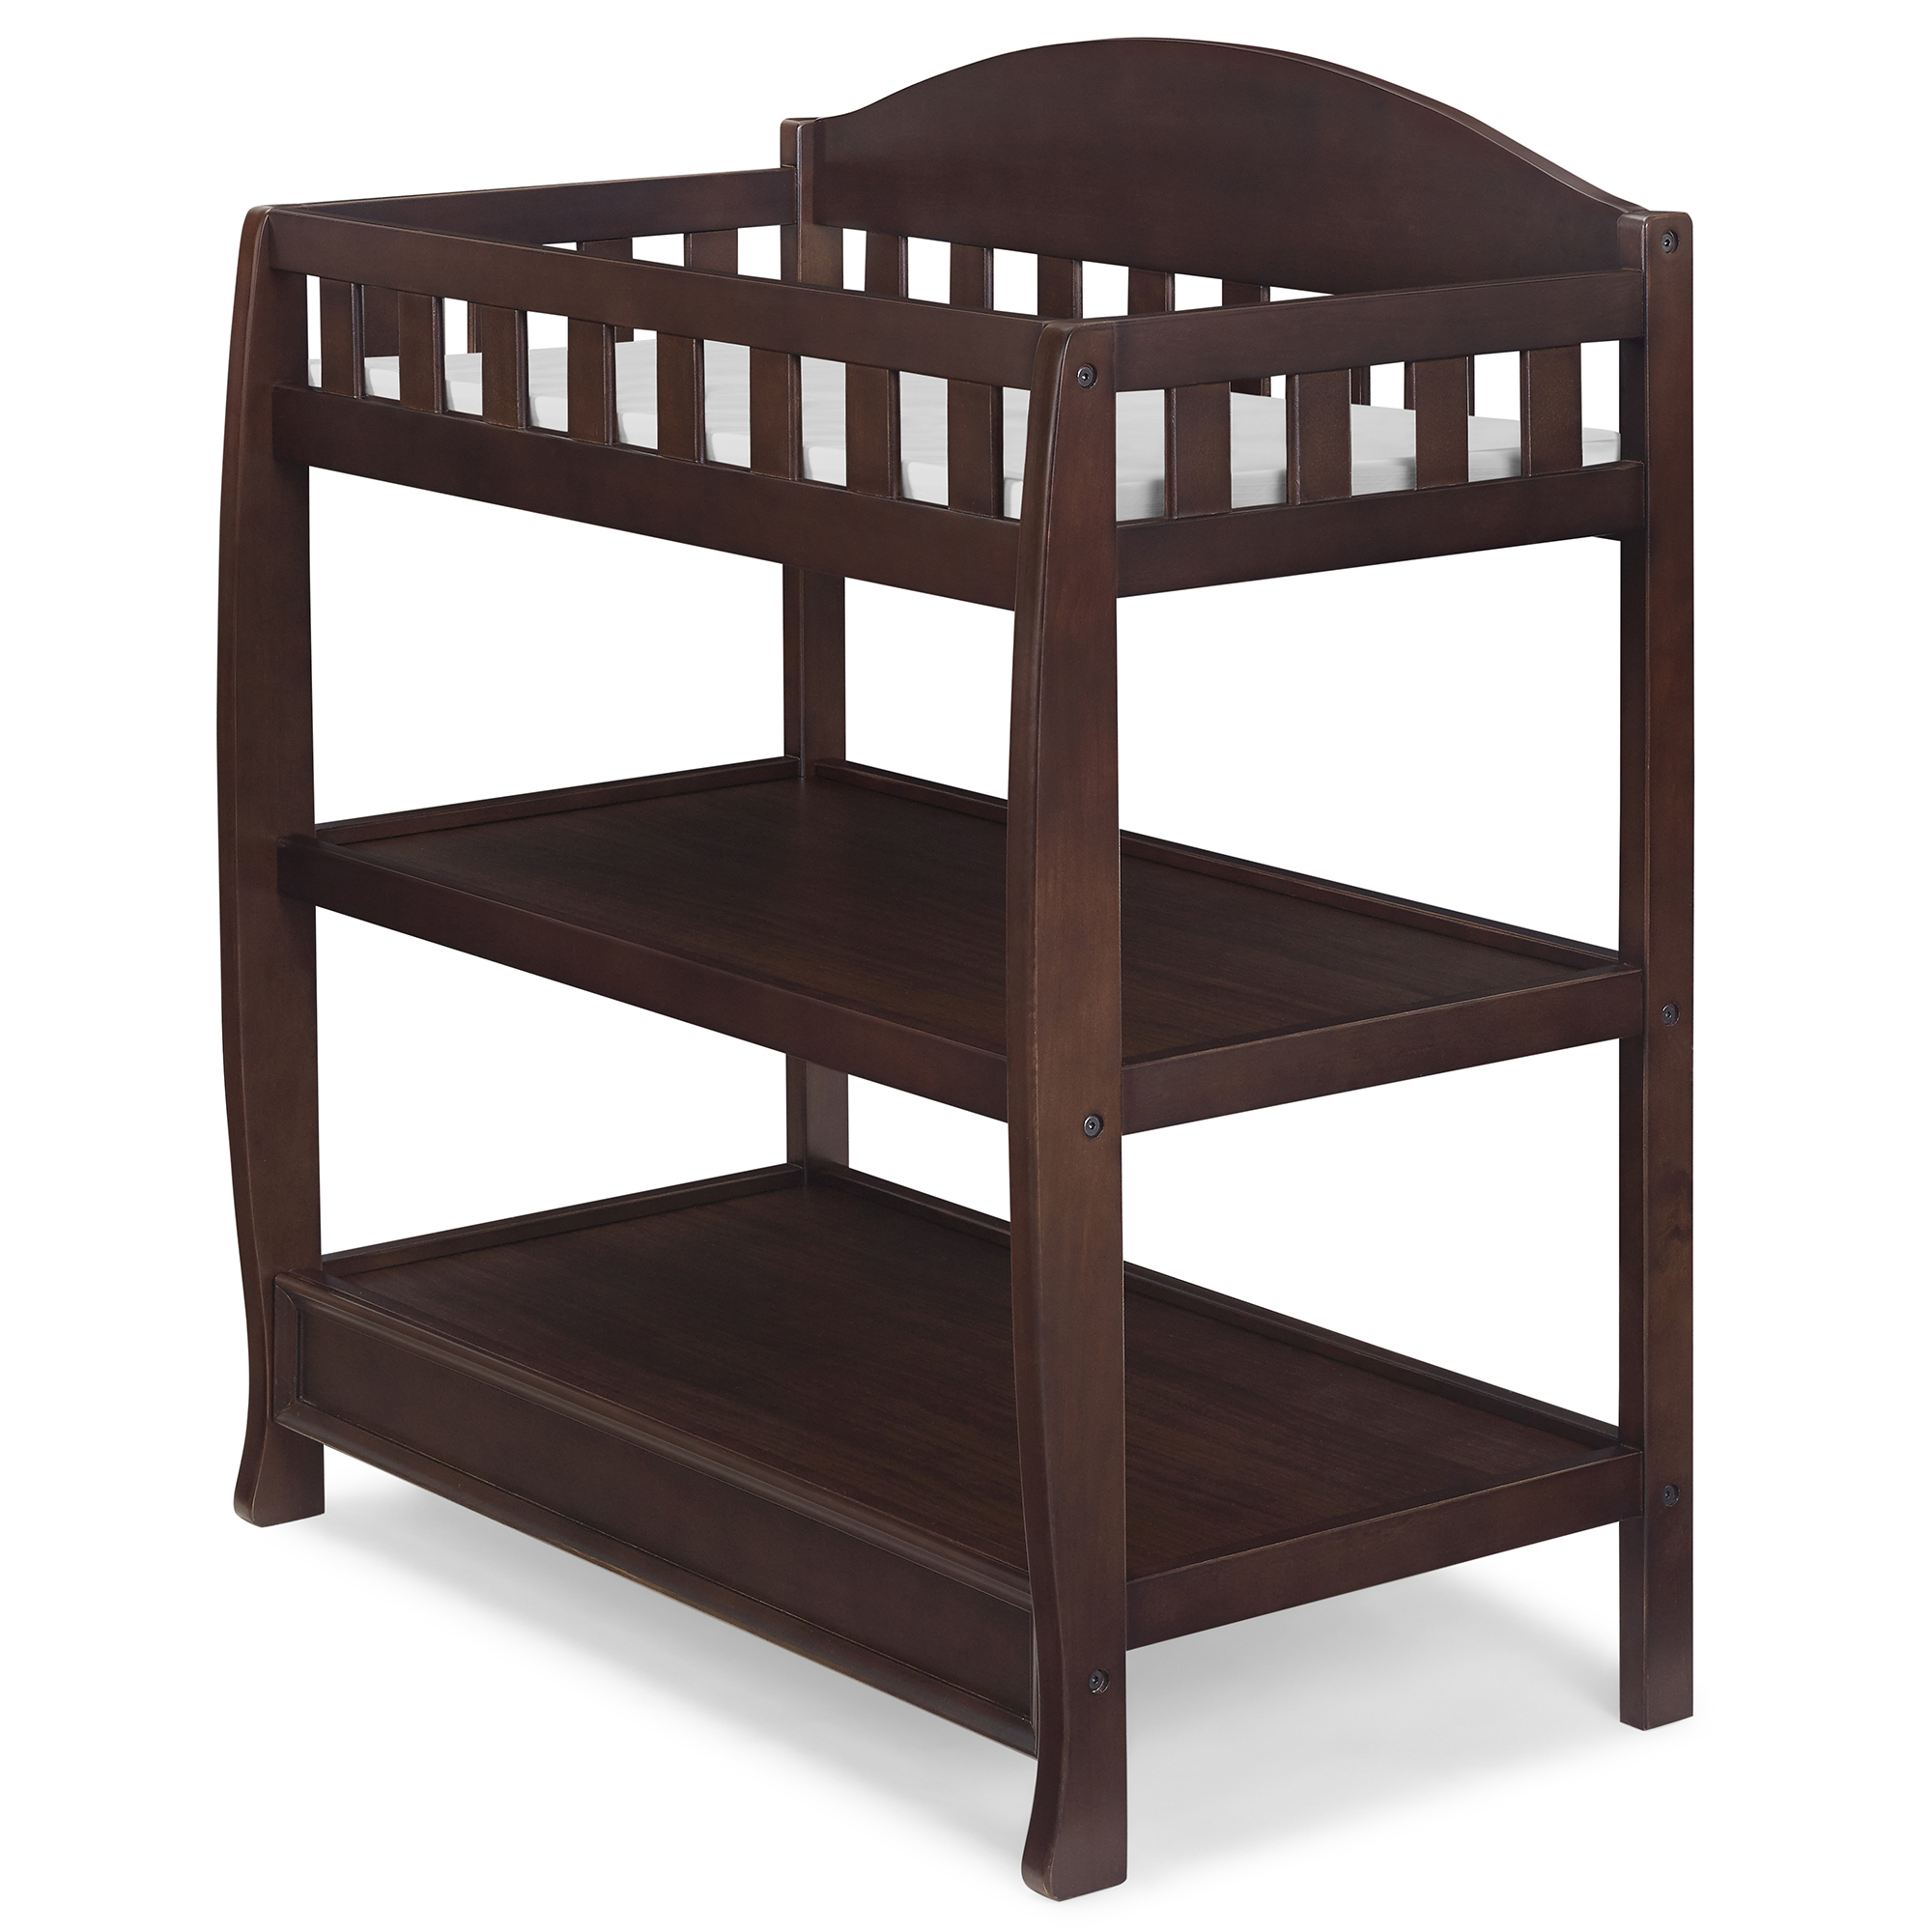 Delta Children Wilmington Changing Table with Pad, Walnut Espresso - image 4 of 5